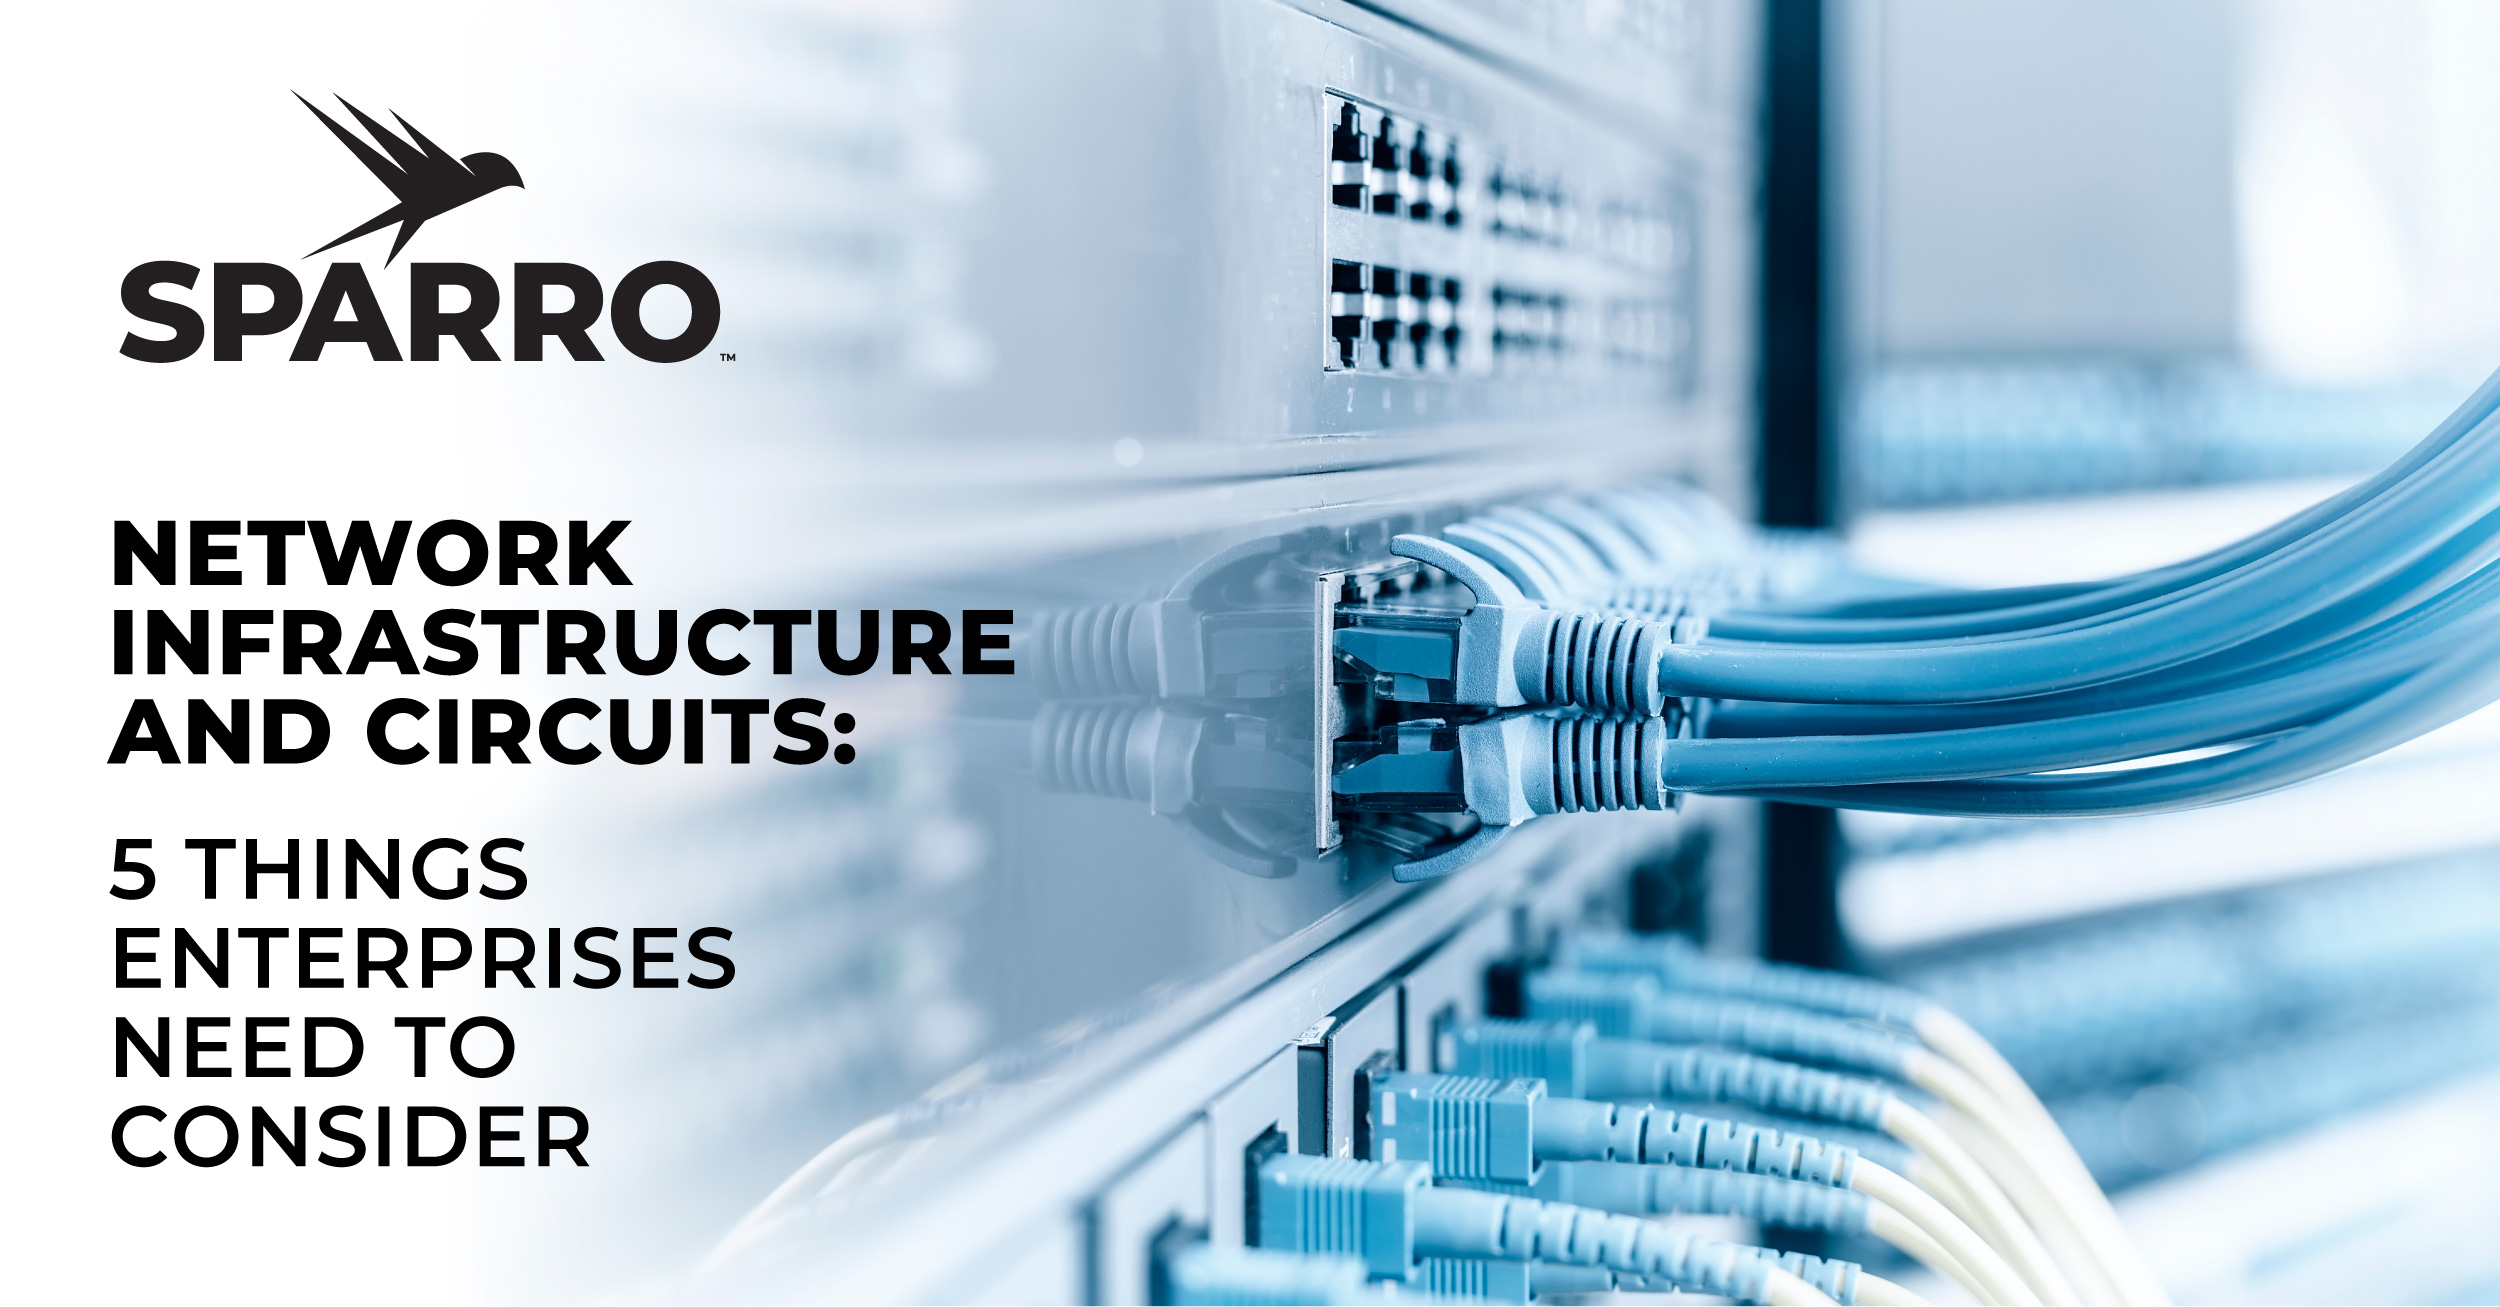 image of network equipment in background with text "Network Infrastructure and Circuits: 5 Things Enterprises Need to Consider" and Sparro logo